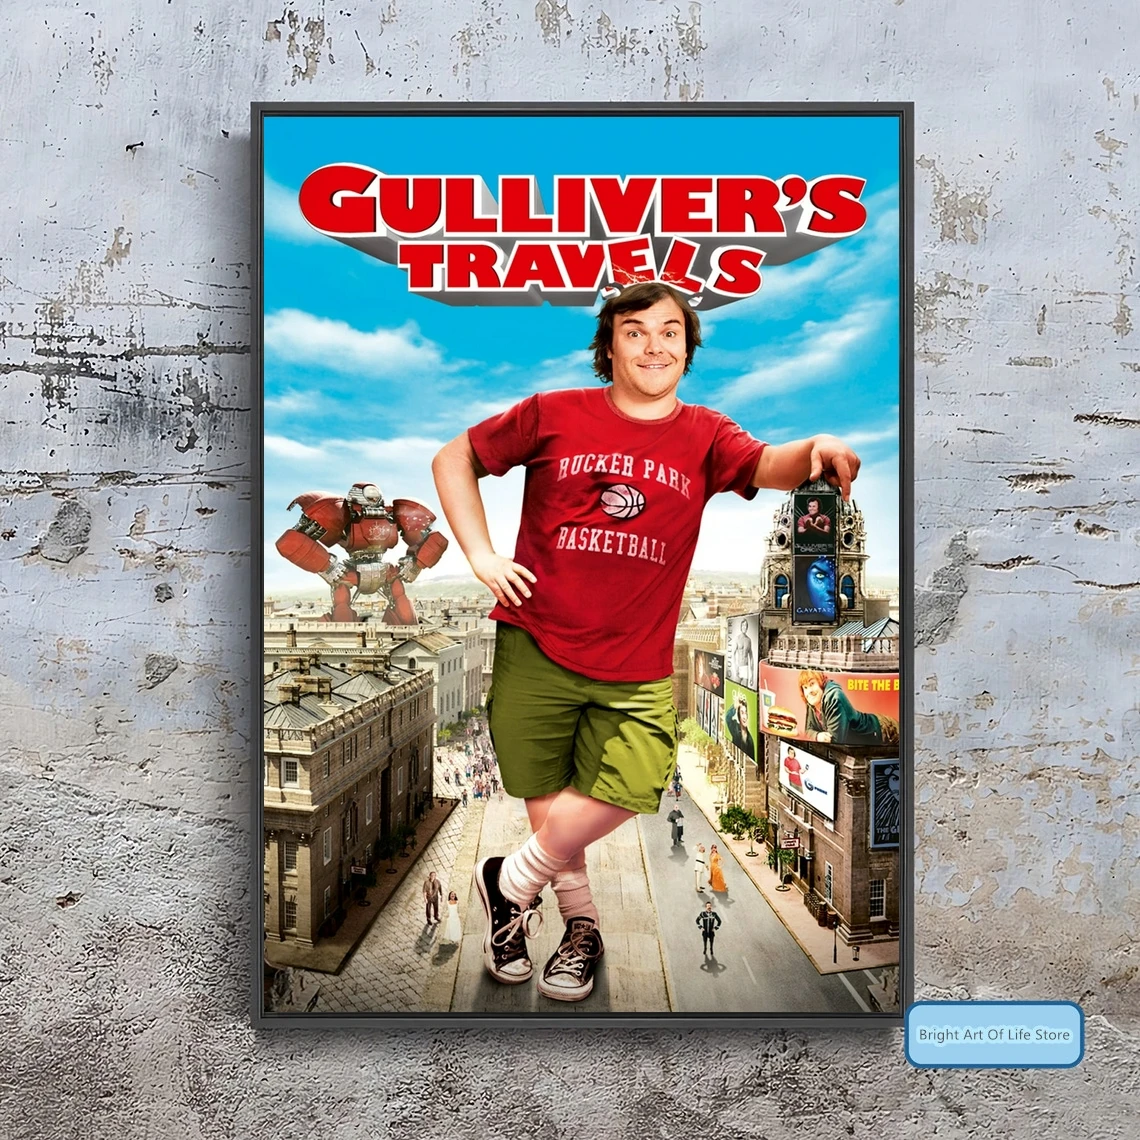 

Gulliver's Travels (2010) Movie Poster Cover Photo Print Canvas Wall Art Home Decor (Unframed)